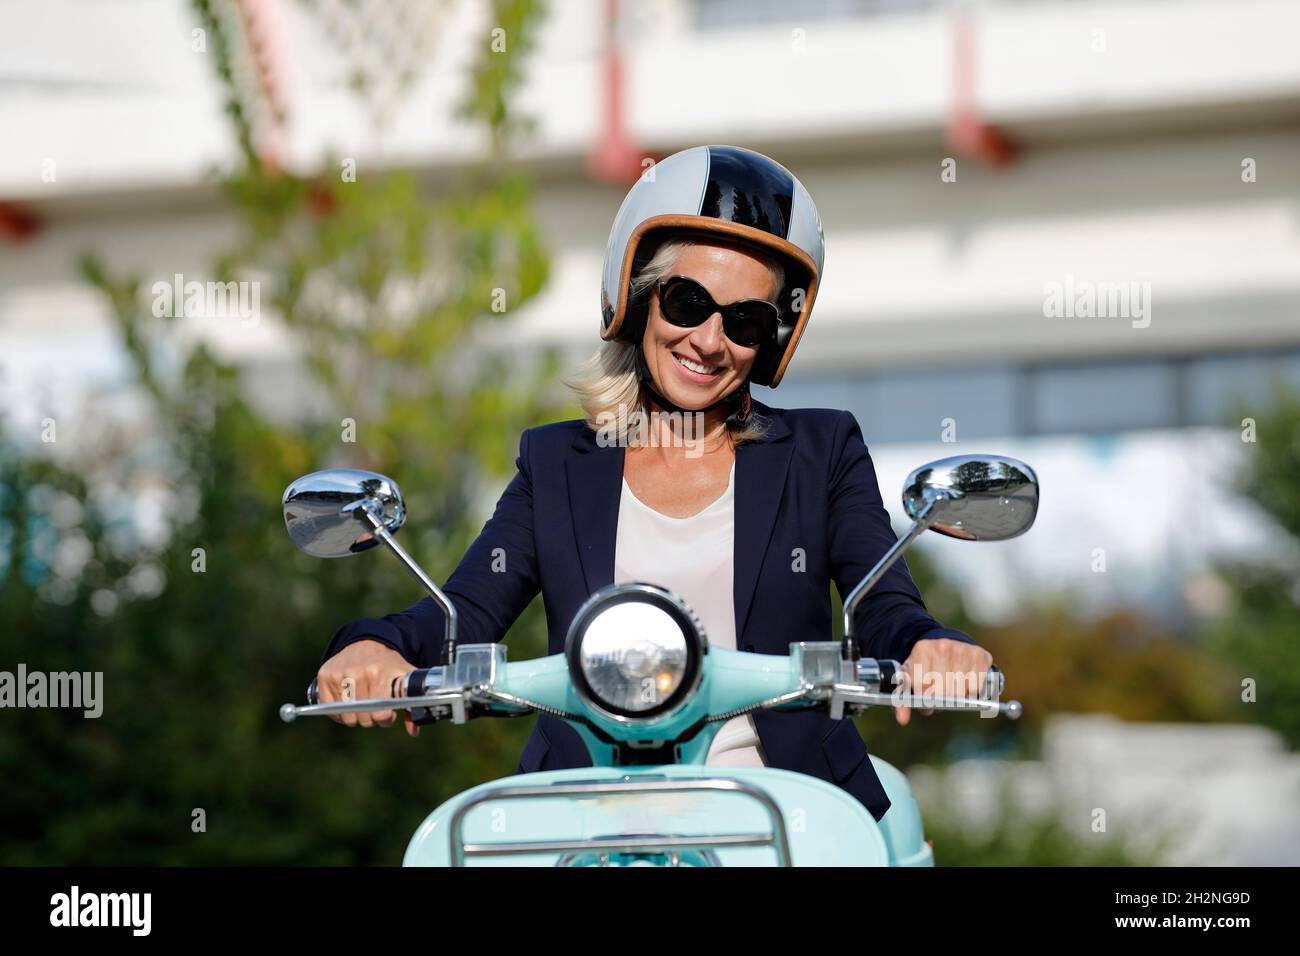 Pretty woman in white costume and sunglasses sitting on moped happily  taking selfie in city center Stock Photo by garetsworkshop